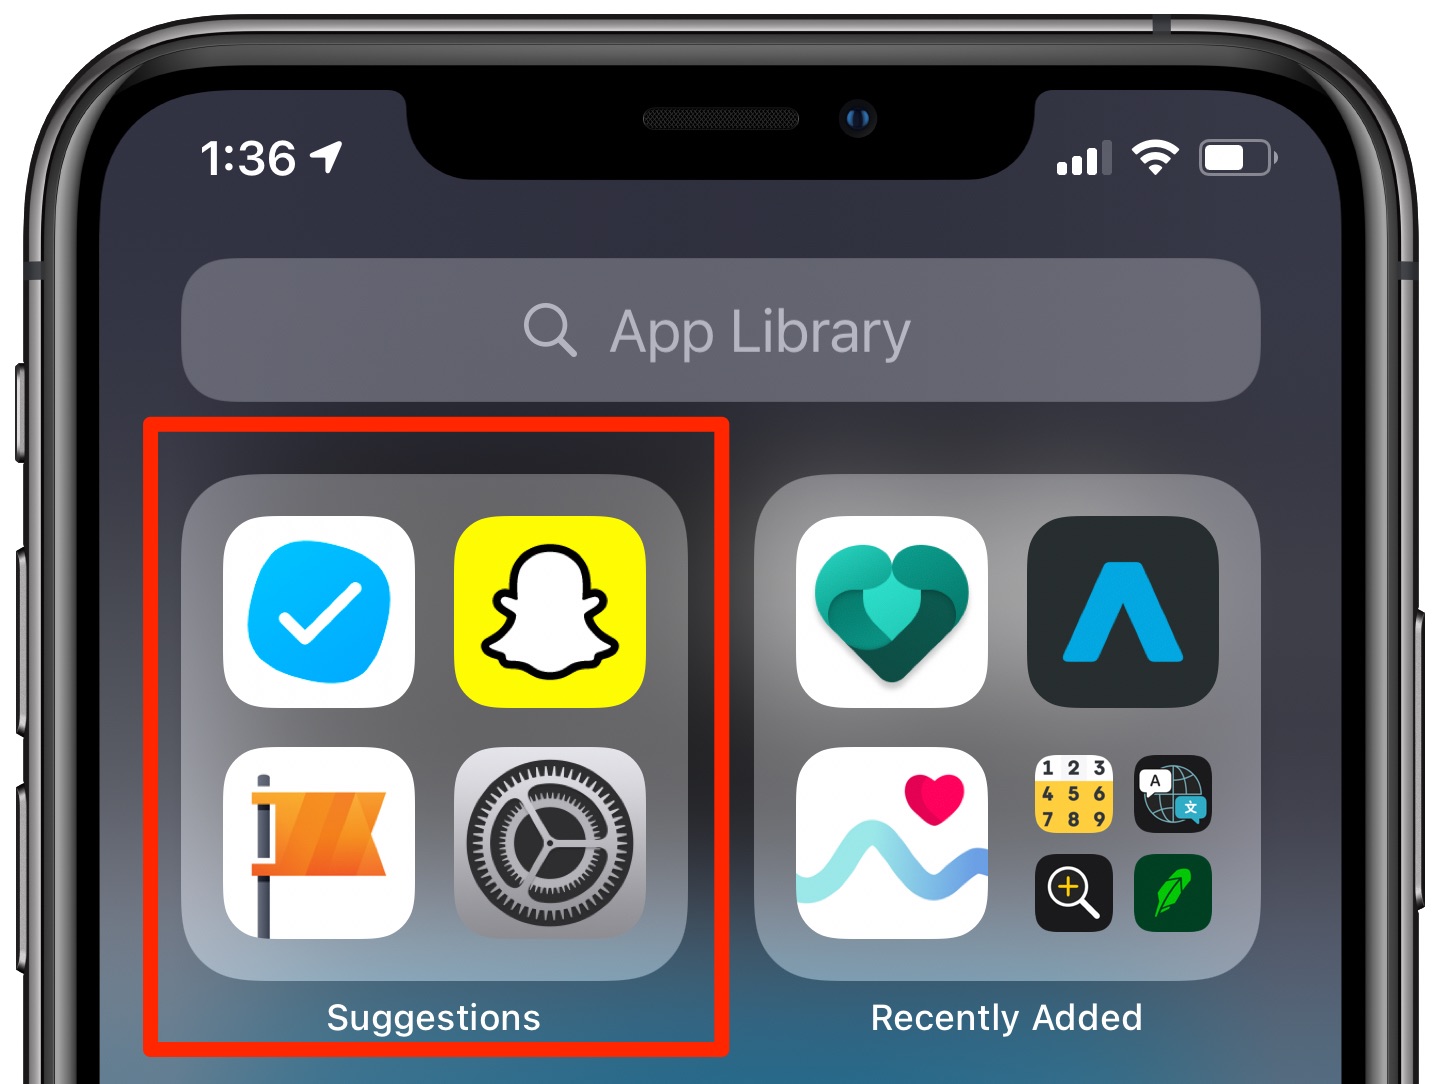 Siri-suggested apps - App Library with the Suggestions folder highlighted